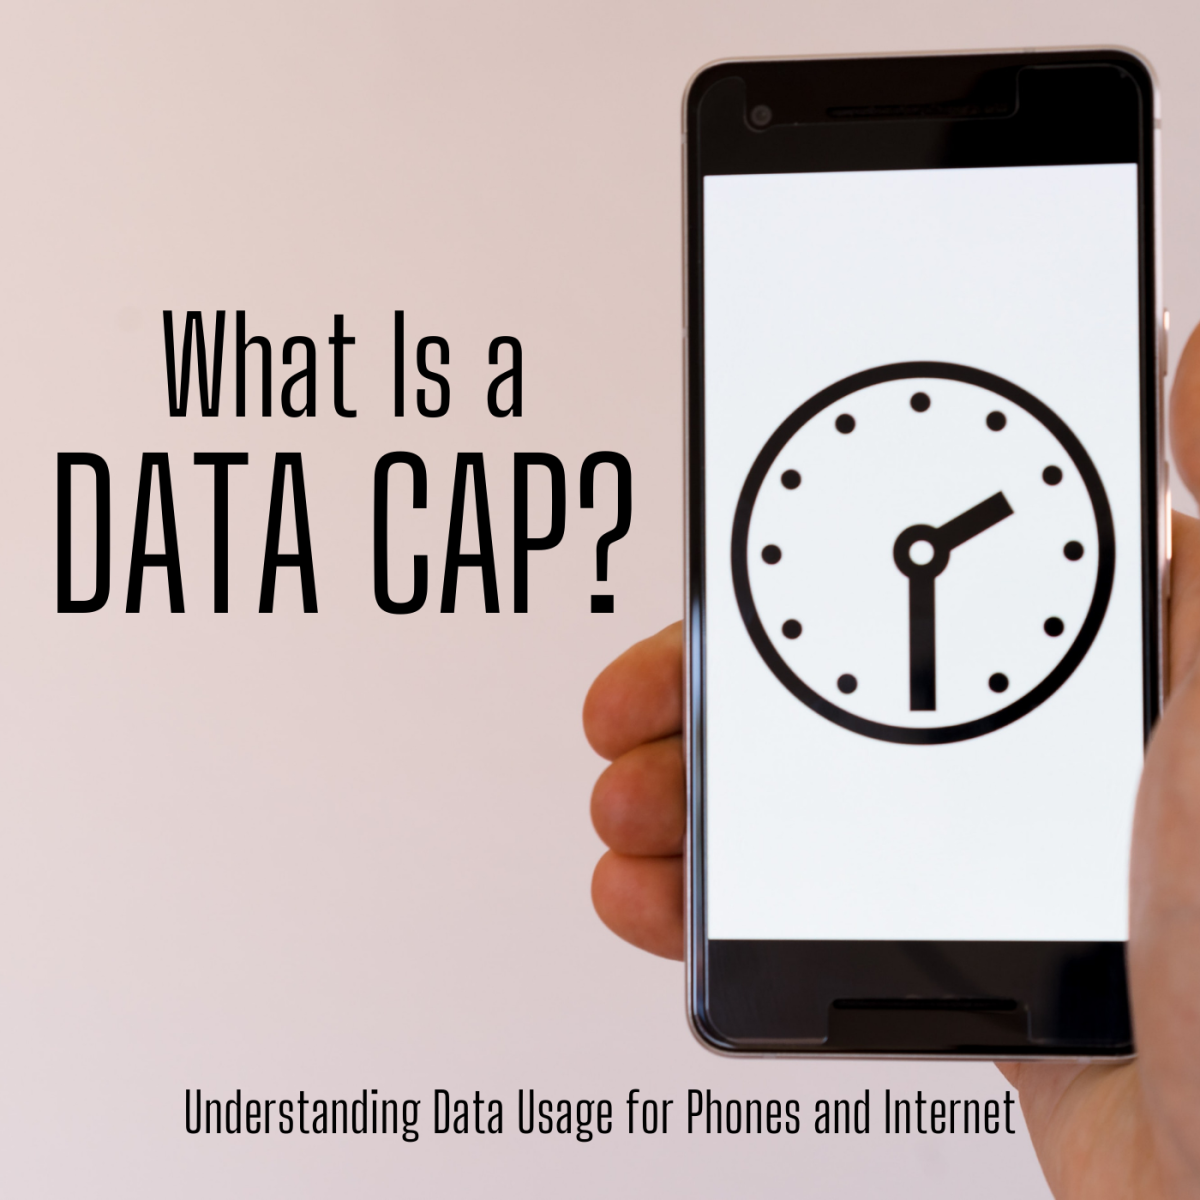 Learn how to avoid overage charges by getting a better grasp on data usage and data caps.